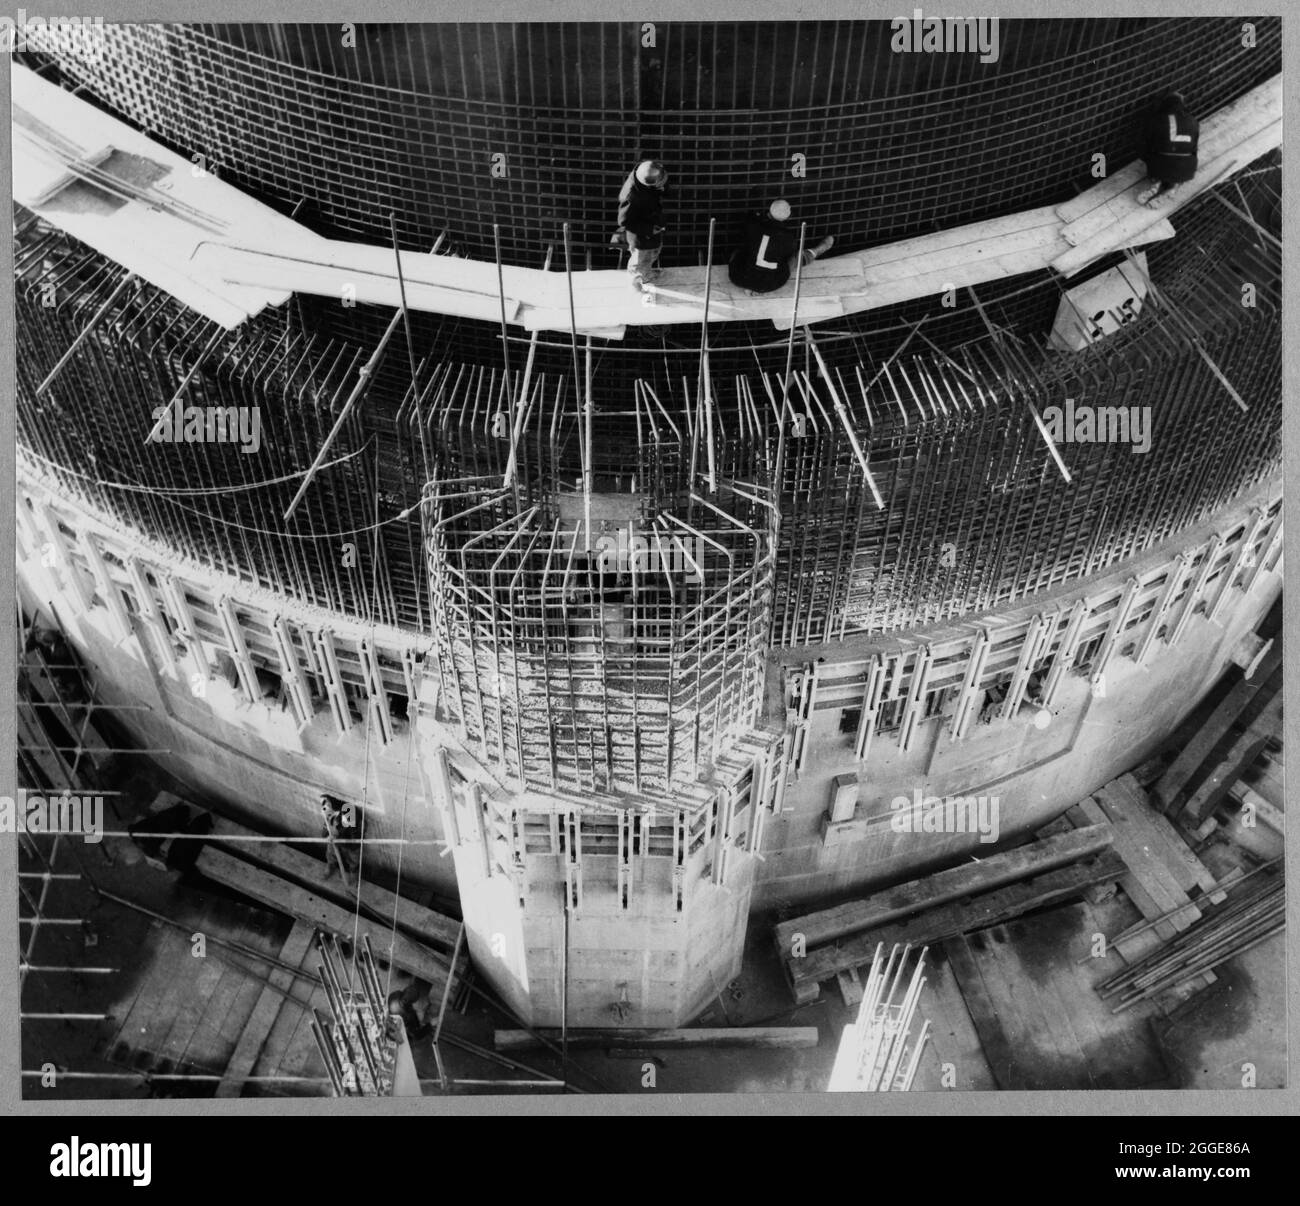 Looking down at the east side of Reactor No.1 during the construction of  Berkeley Nuclear Power Station, showing the biological shield and its  discharge shaft with a Laing team working above. Berkeley